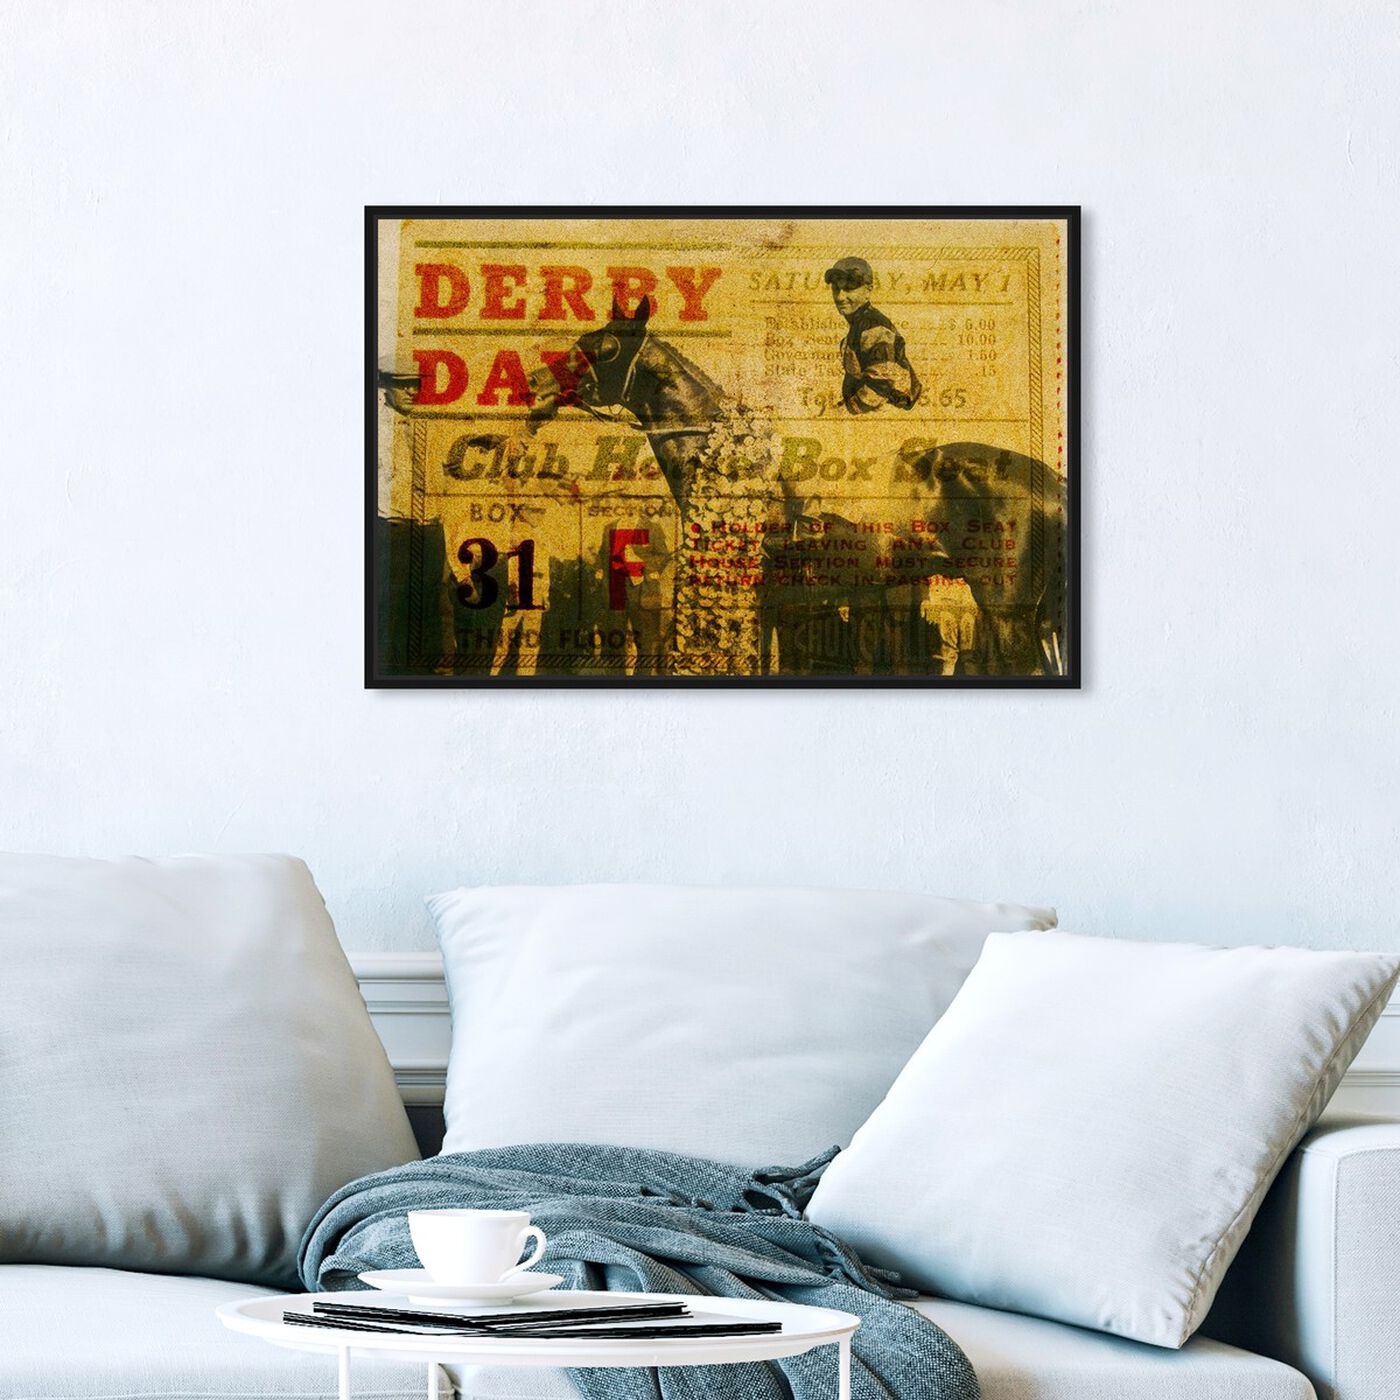 Hanging view of Derby Day 1943 featuring advertising and posters art.